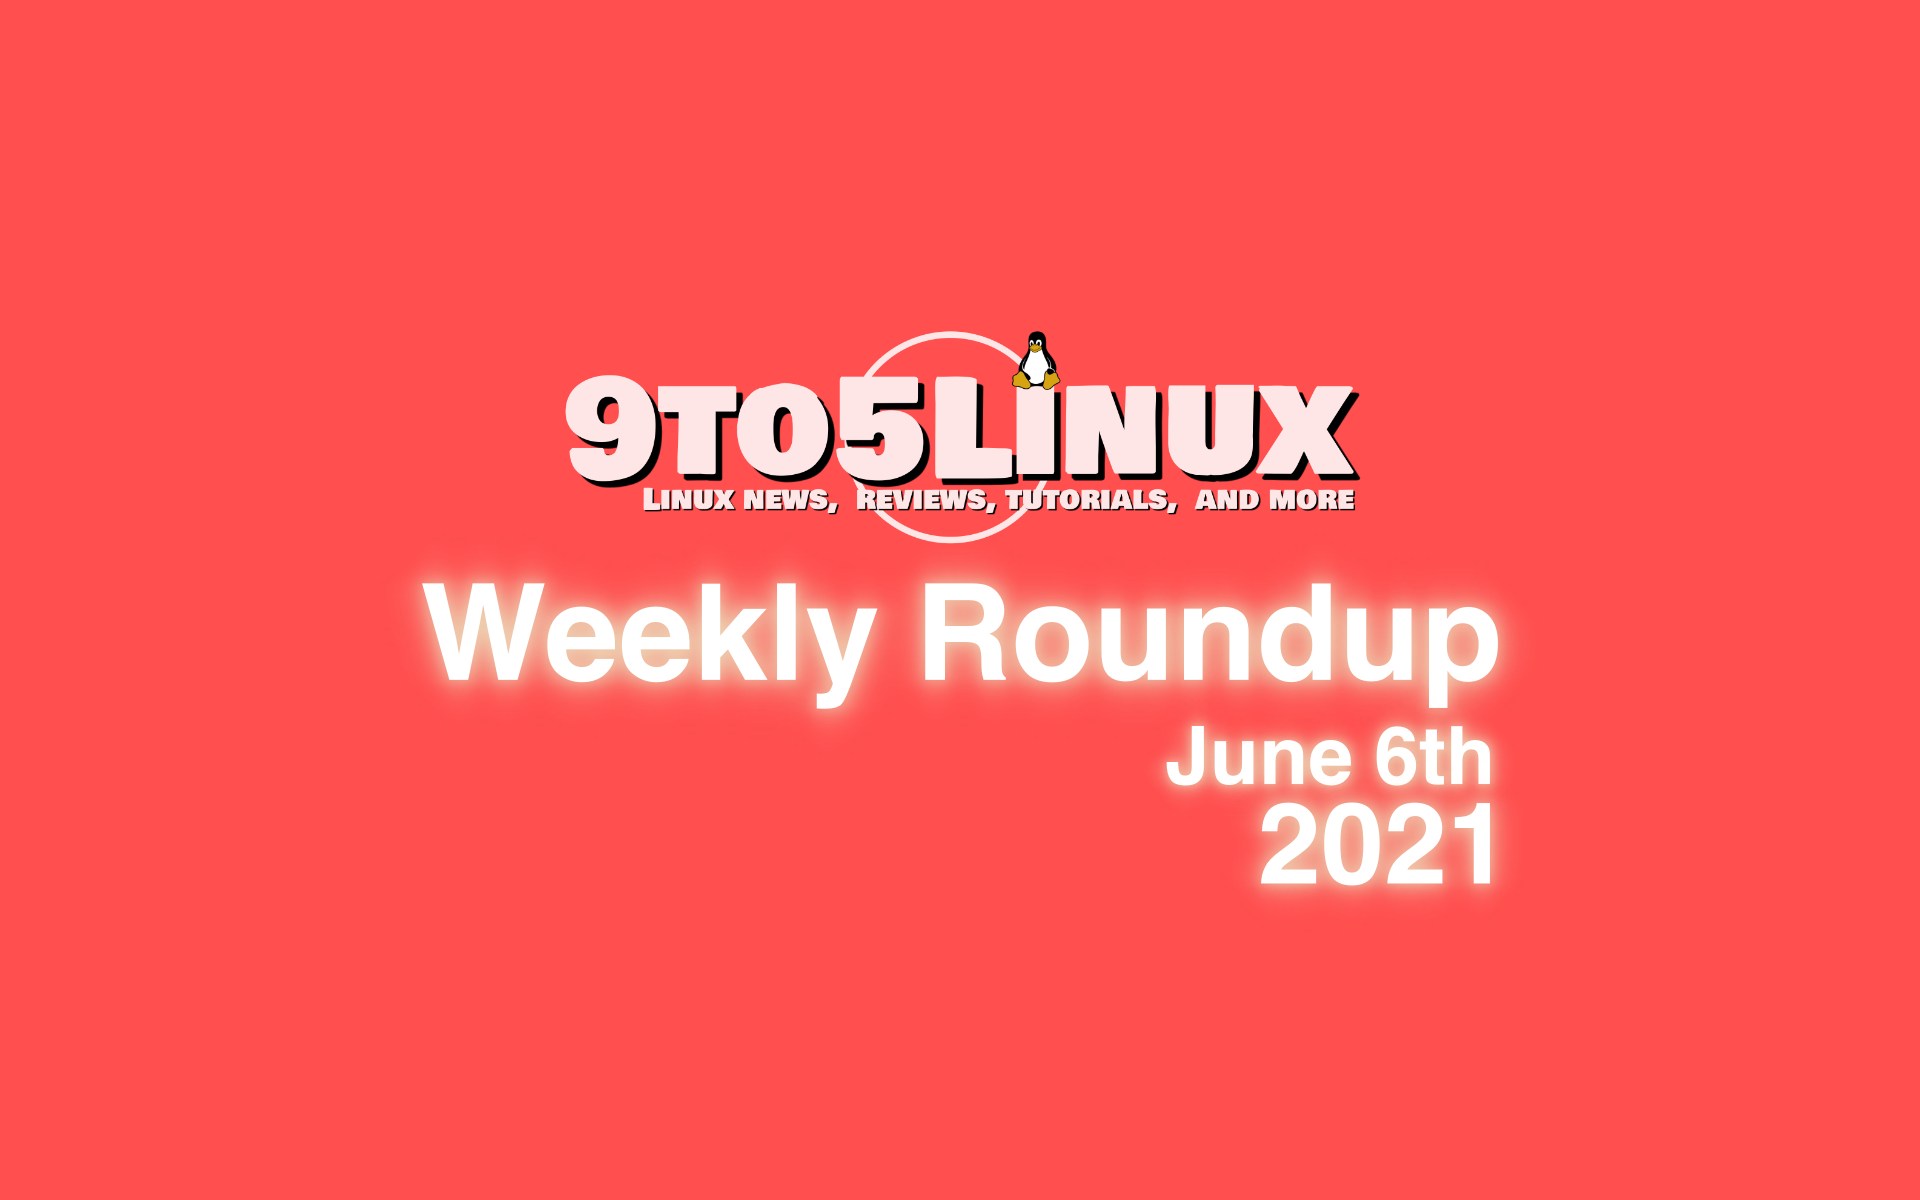 9to5Linux Weekly Roundup: June 6th, 2021